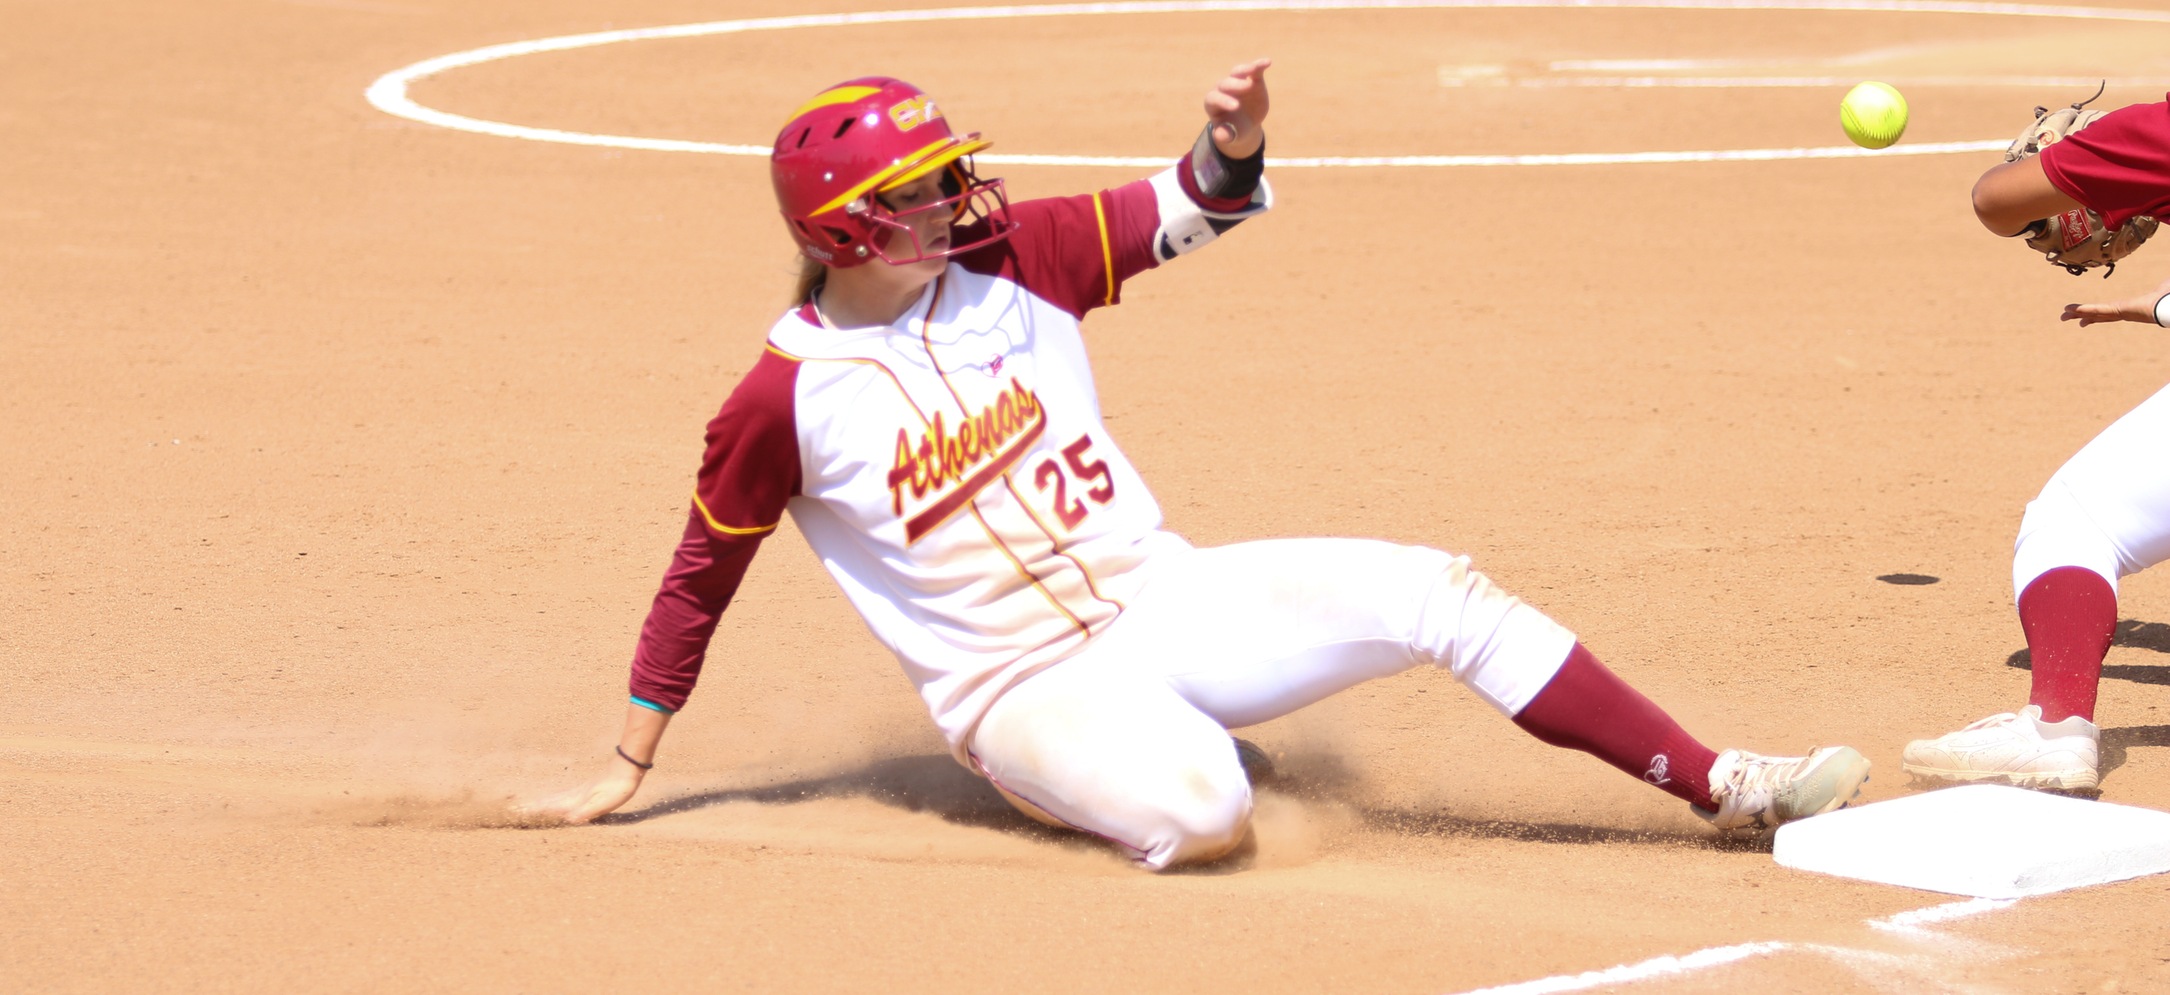 Carly Roleder (CMC) slides into third in Friday's game against Chapman. (photo credit: Matthew Fenton)